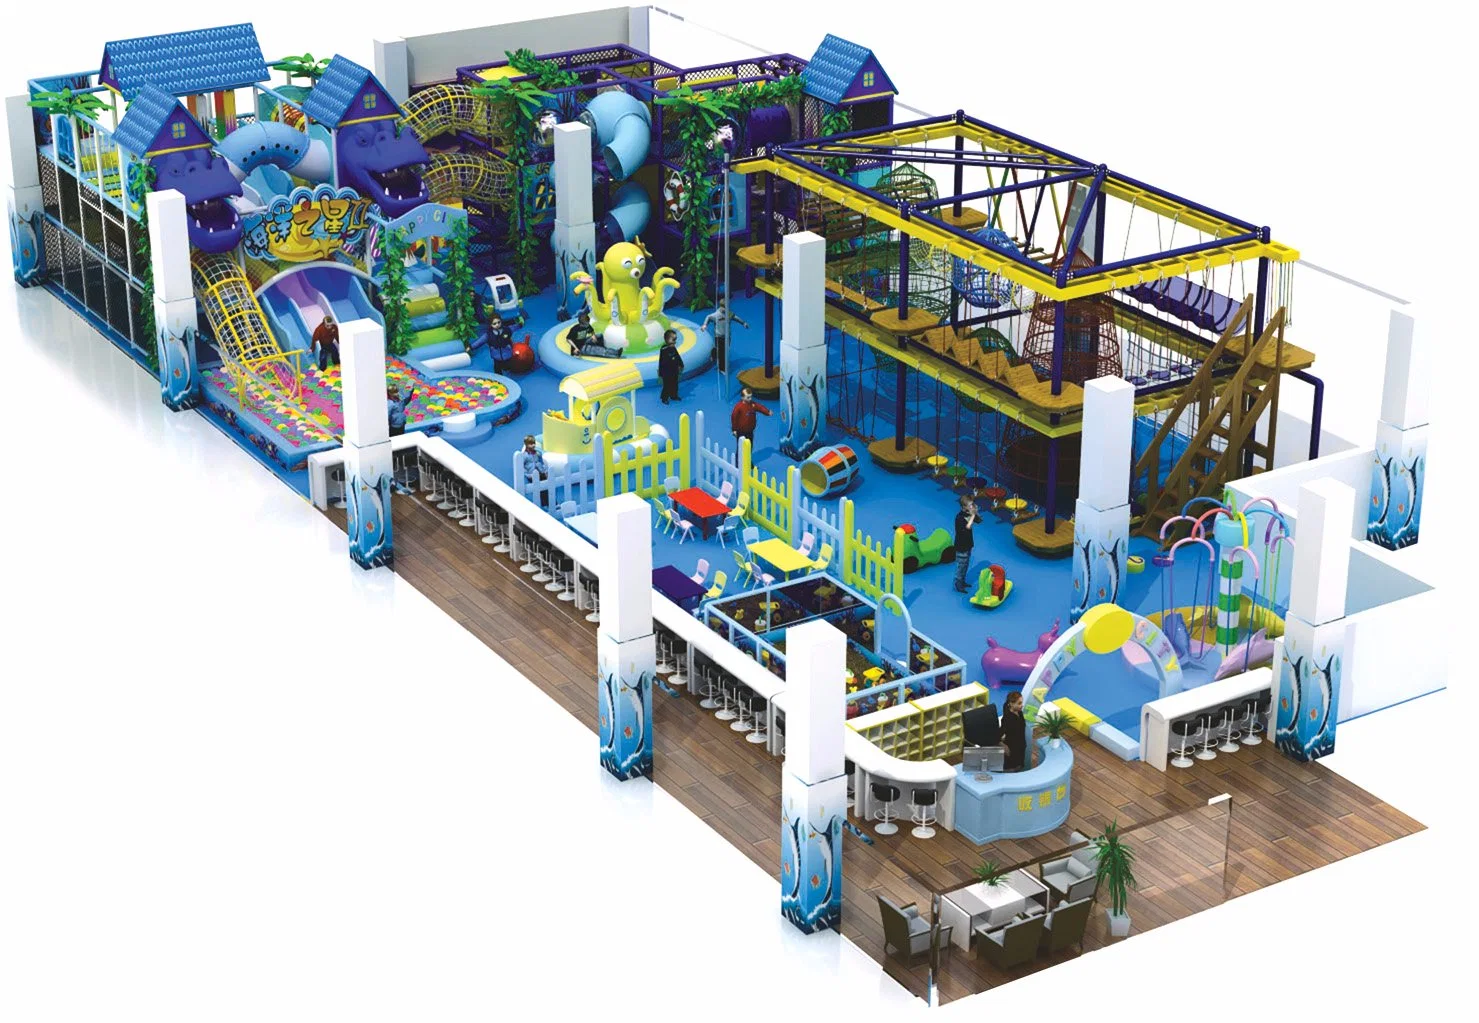 Large Adventure Soft Indoor Play Centre Playground Equipment for Sale